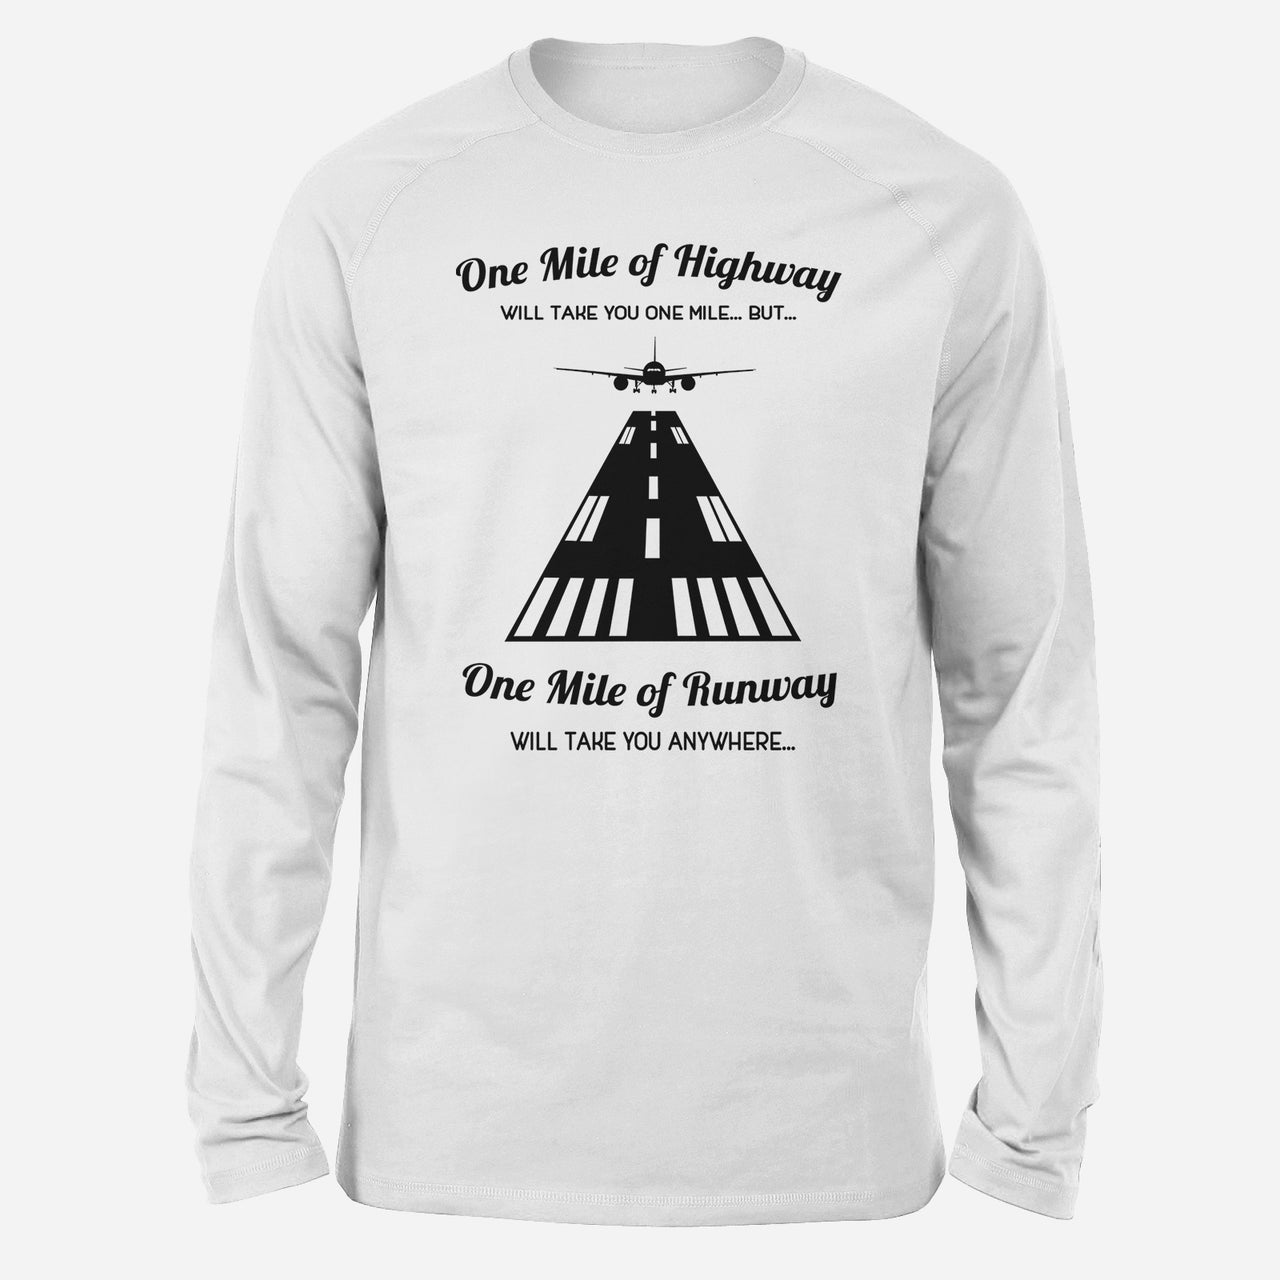 One Mile of Runway Will Take you Anywhere Designed Long-Sleeve T-Shirts